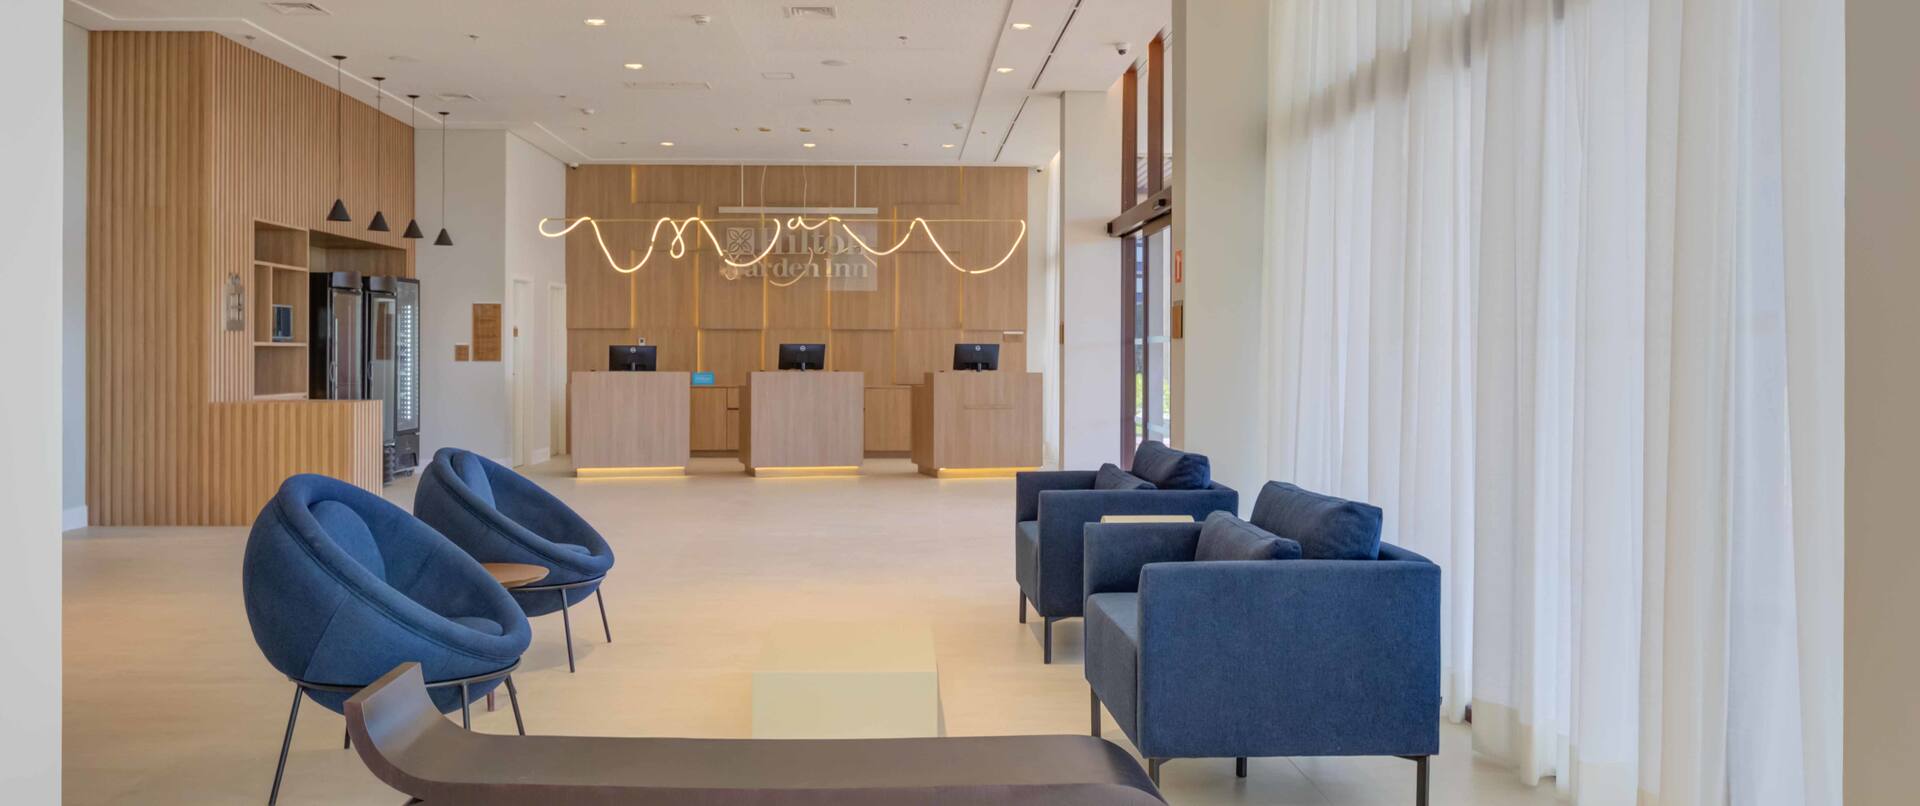 Lobby seating and front desk reception